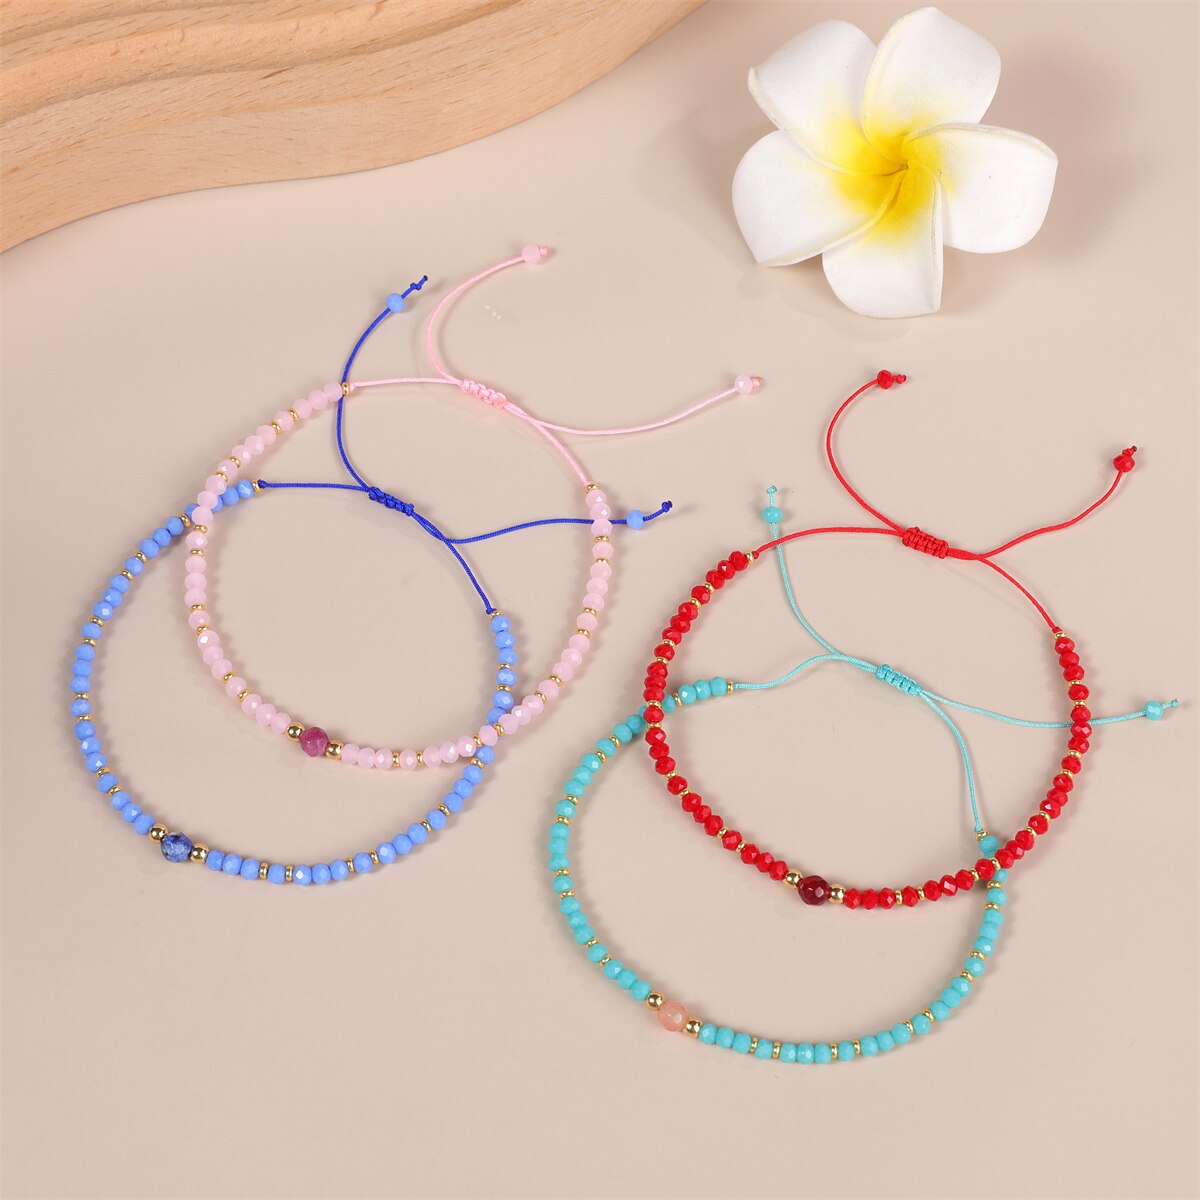 Women Crystal Faceted Glass Beads Charms Bracelets Boho Woven Adjustable Wristband Cuff Jewelry